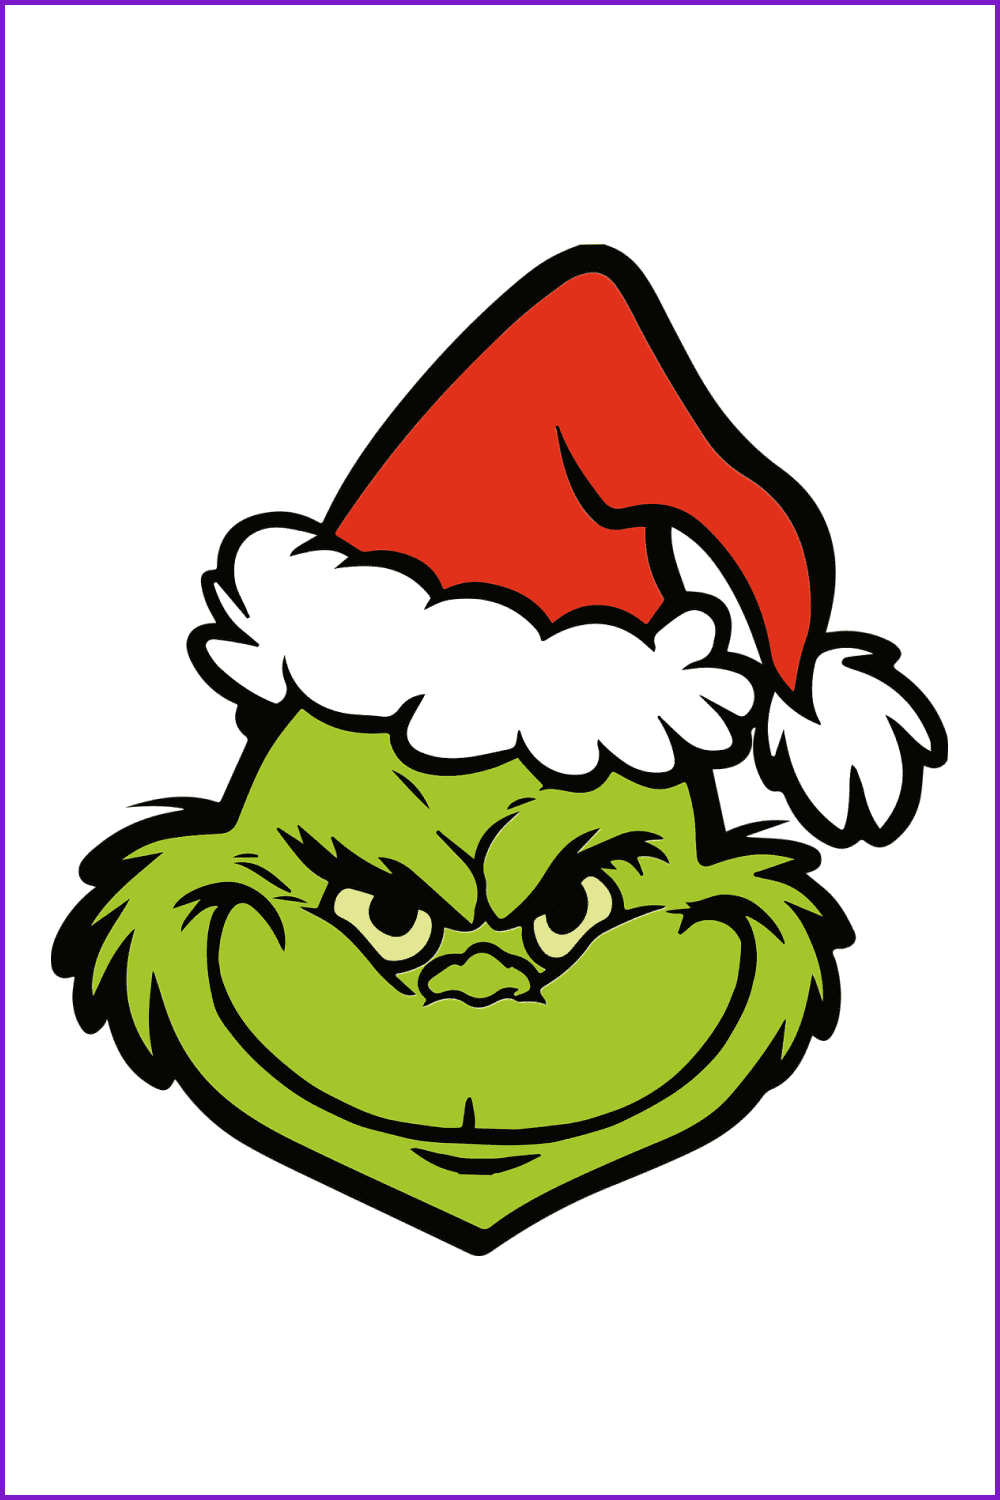 Grinch face Christmas character.